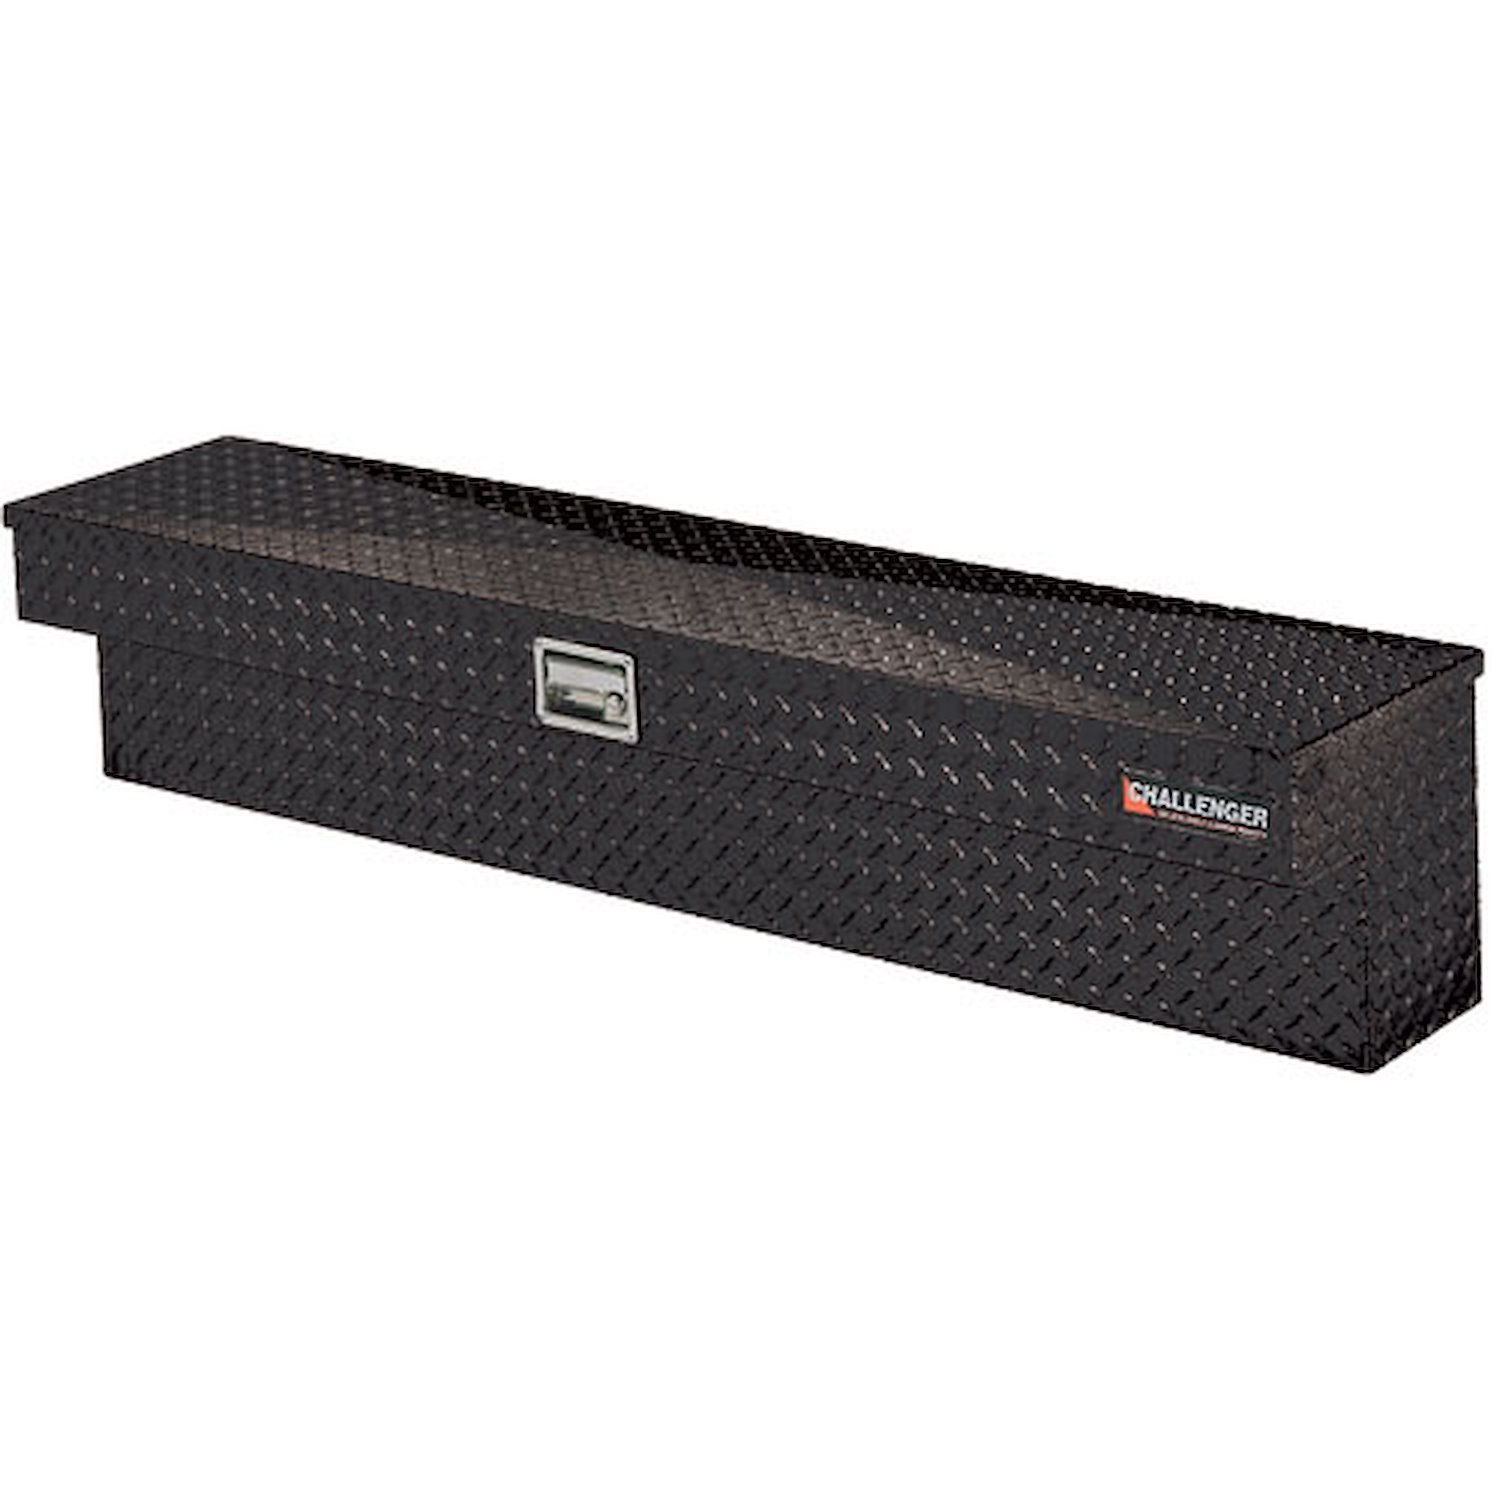 Truck Bed Challenger Tool Box Side Mount